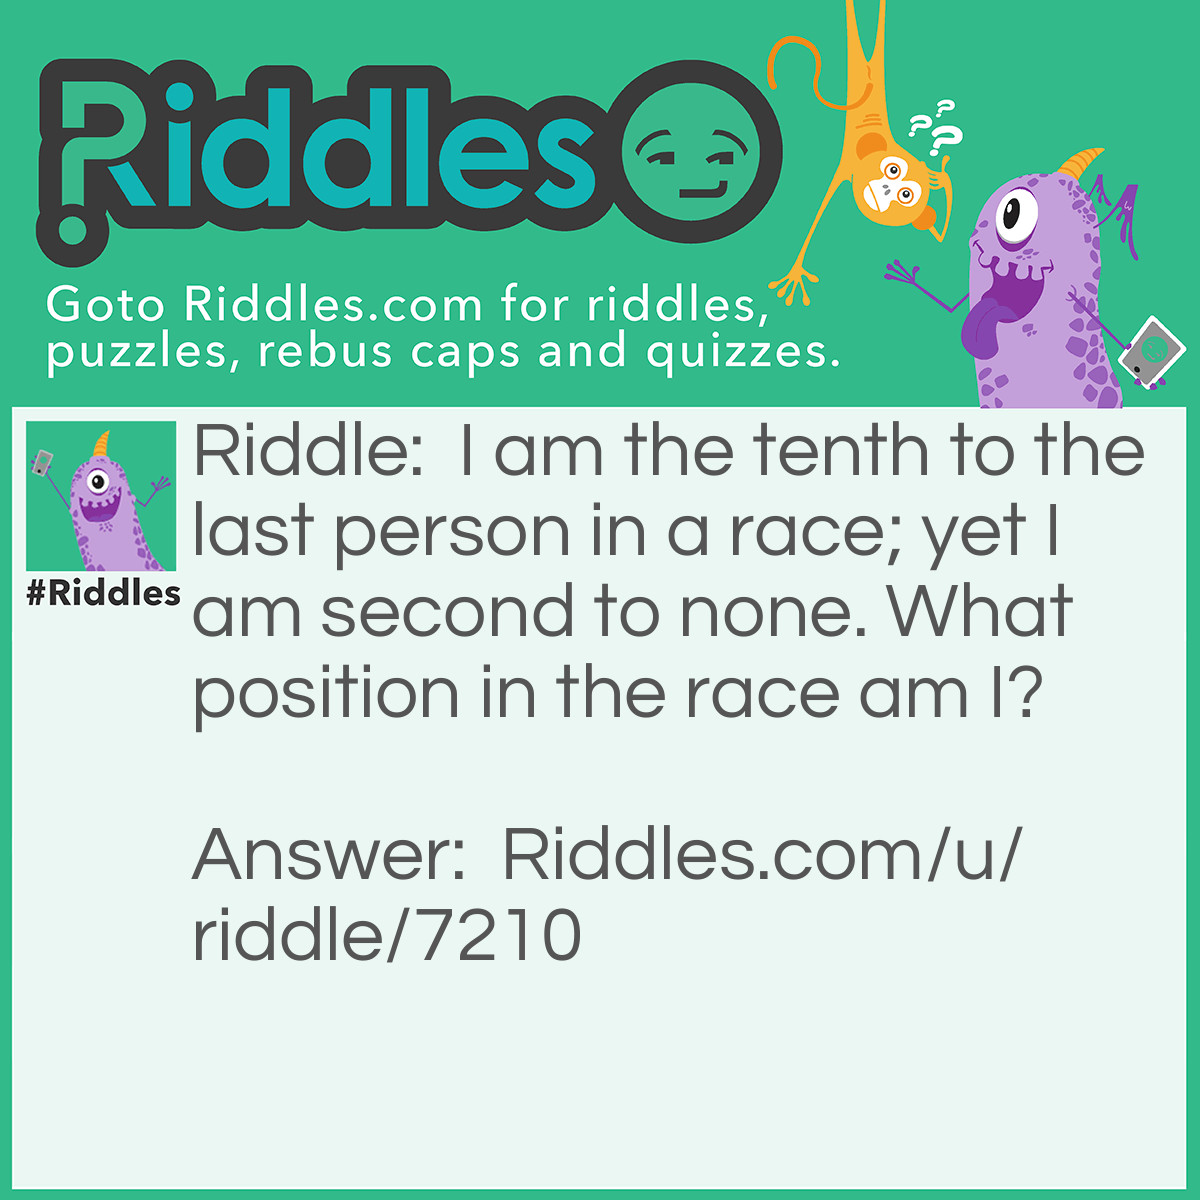 Riddle: I am the tenth to the last person in a race; yet I am second to none. What position in the race am I? Answer: I am in the 1st position.